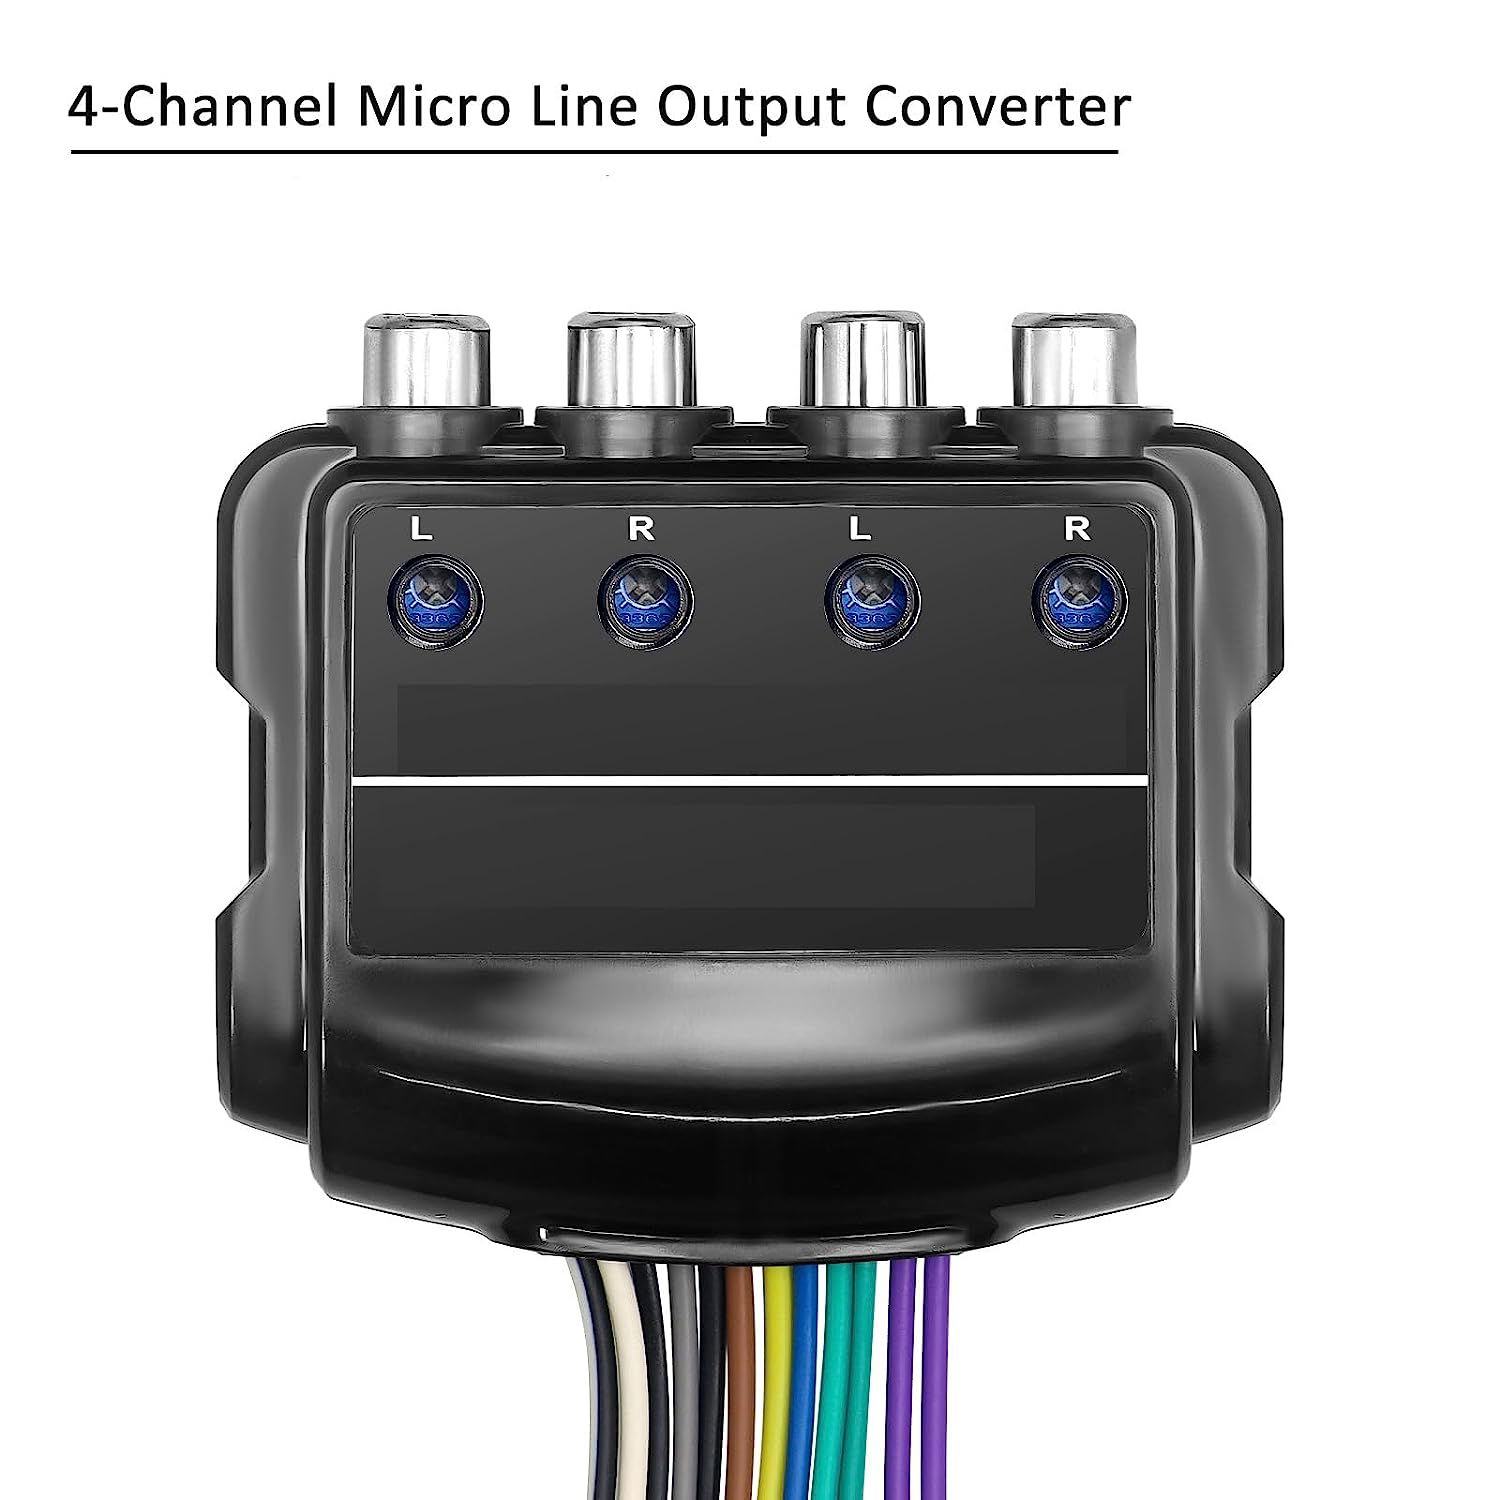 Smart Micro Line Output 4-Channel Converter with 10V Output and 12V Remote Turn-On Trigger with 60 Ohm Load Impedance Image 